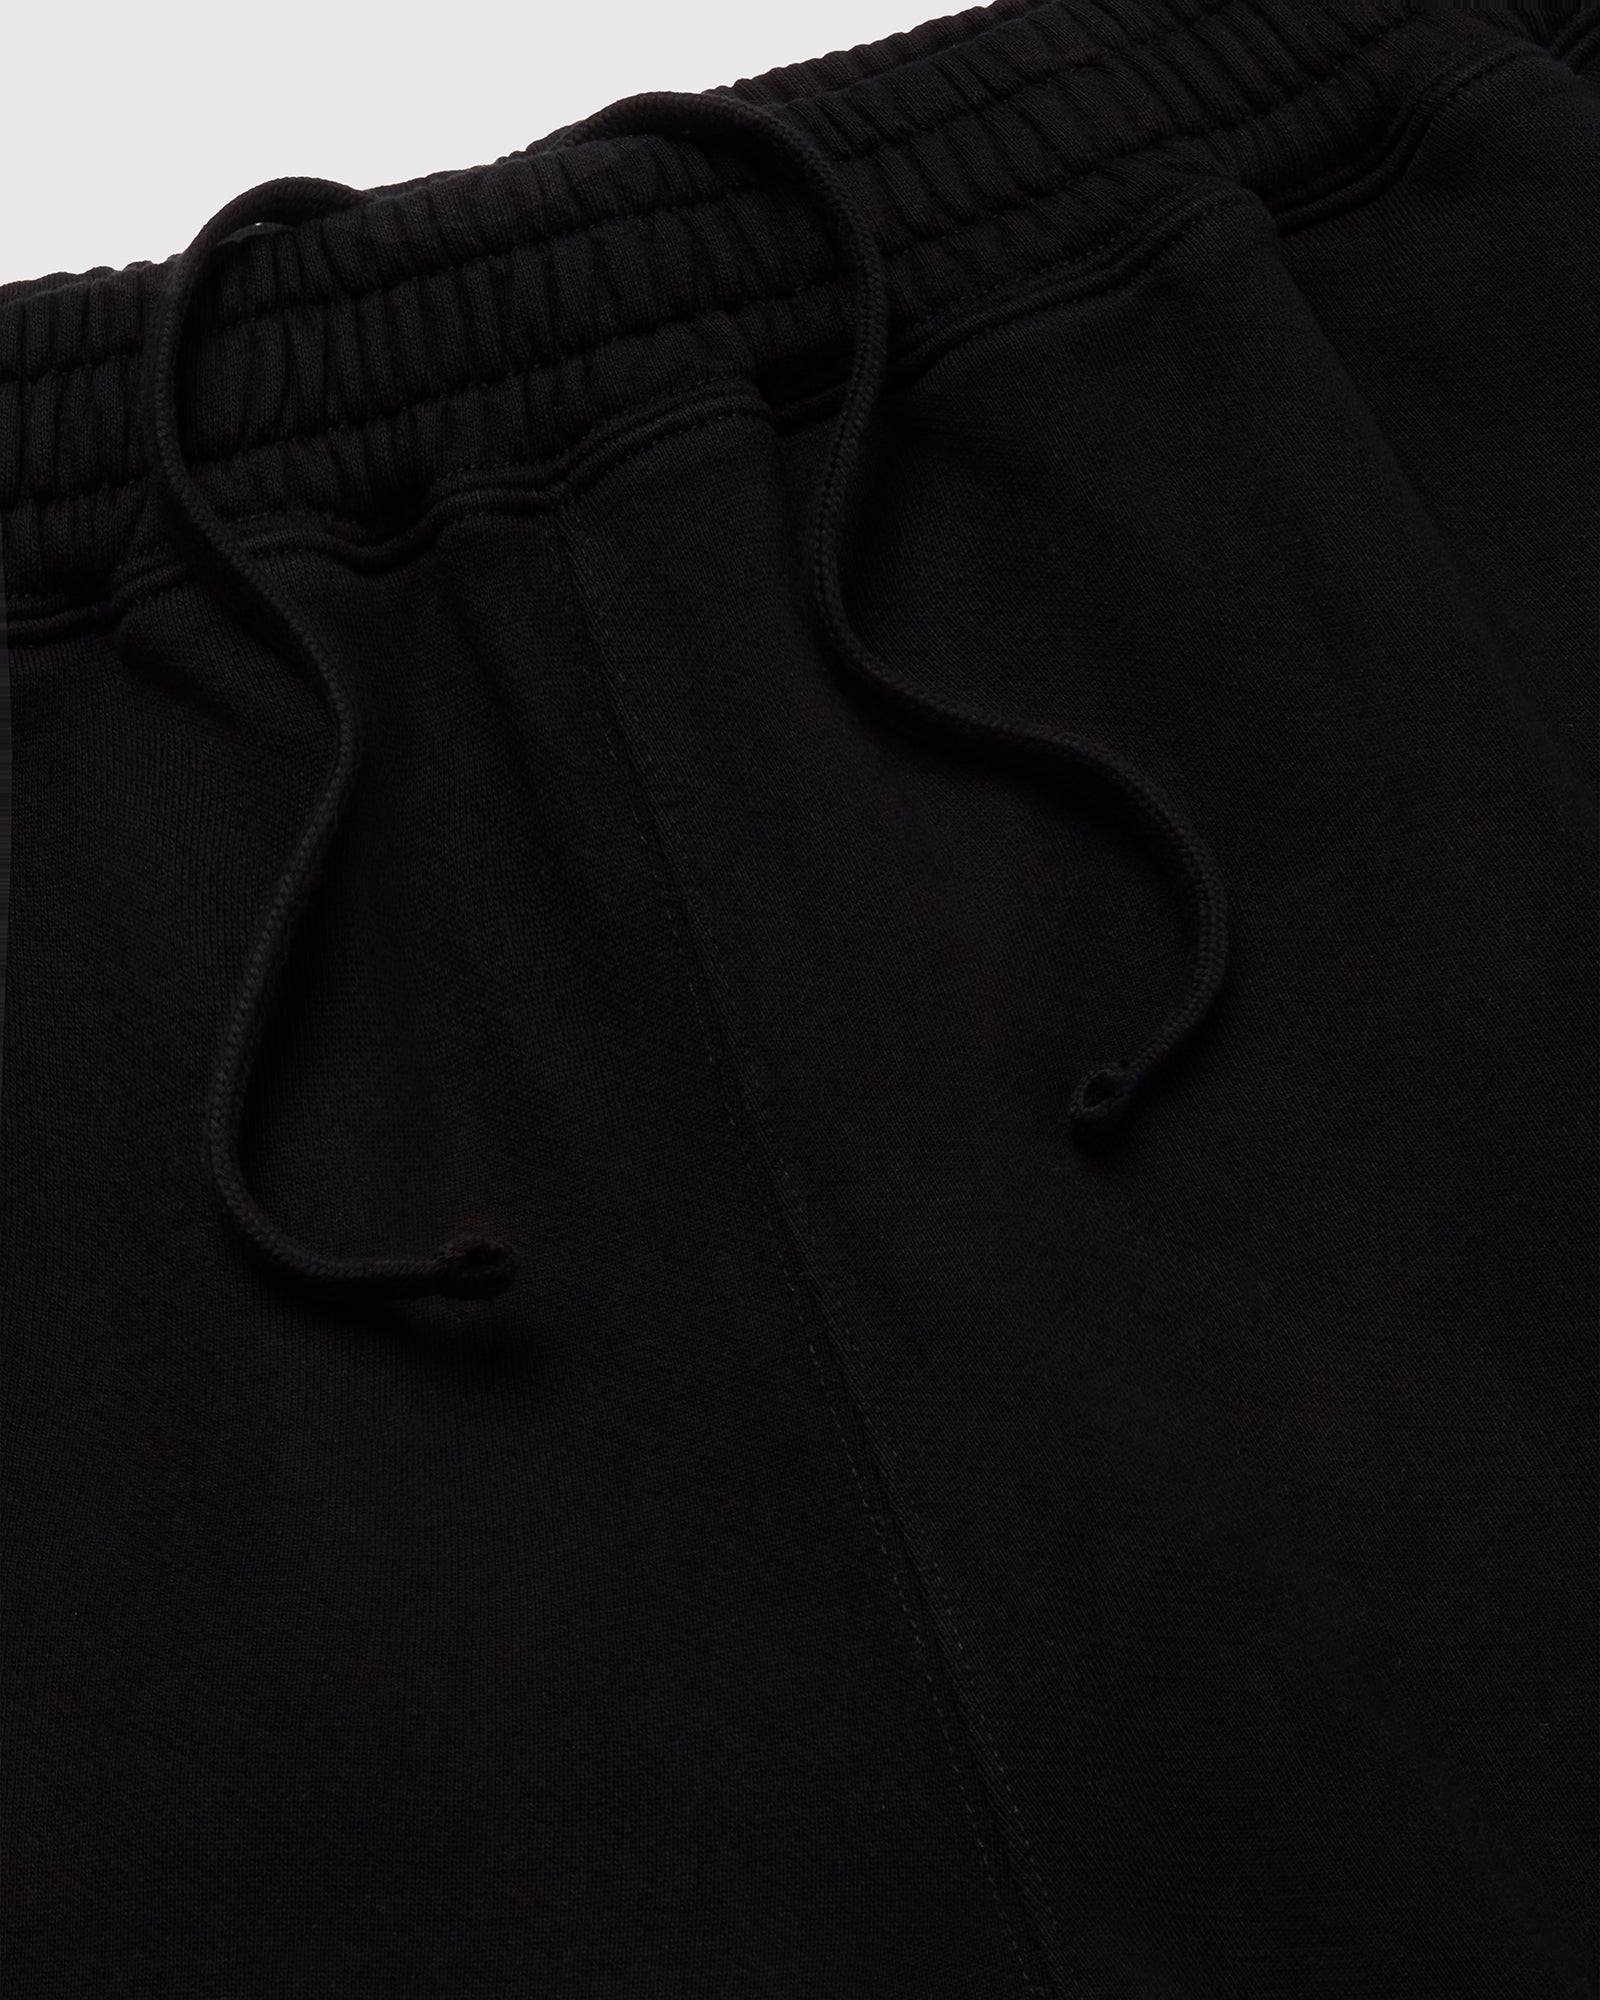 French Terry Relaxed Fit Sweatpant - Black